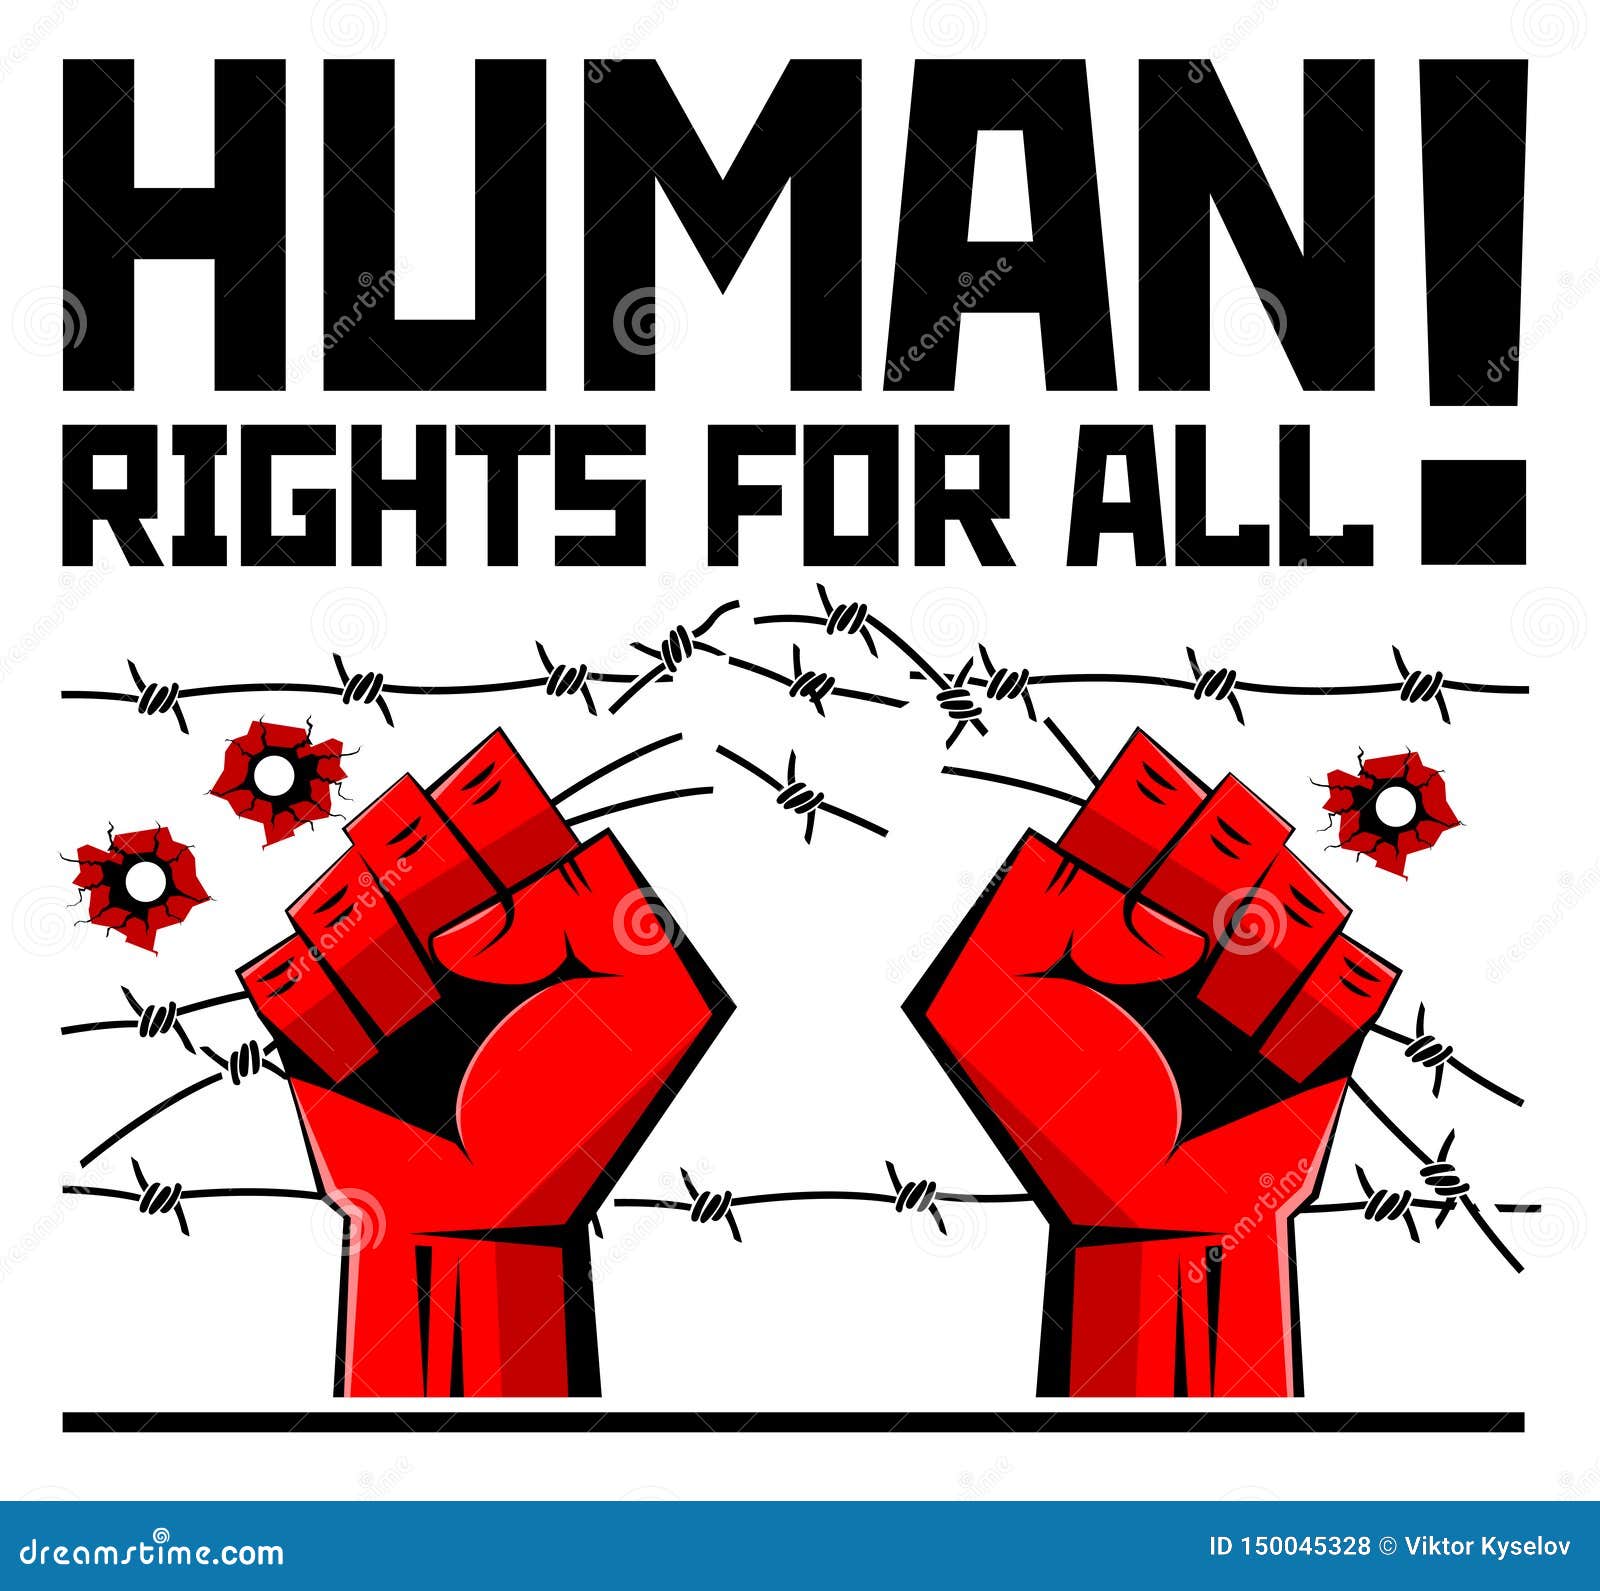 human-rights-all-human-hands-tear-barbed-wire-propaganda-poster-vector-human-rights-all-150045328.jpg